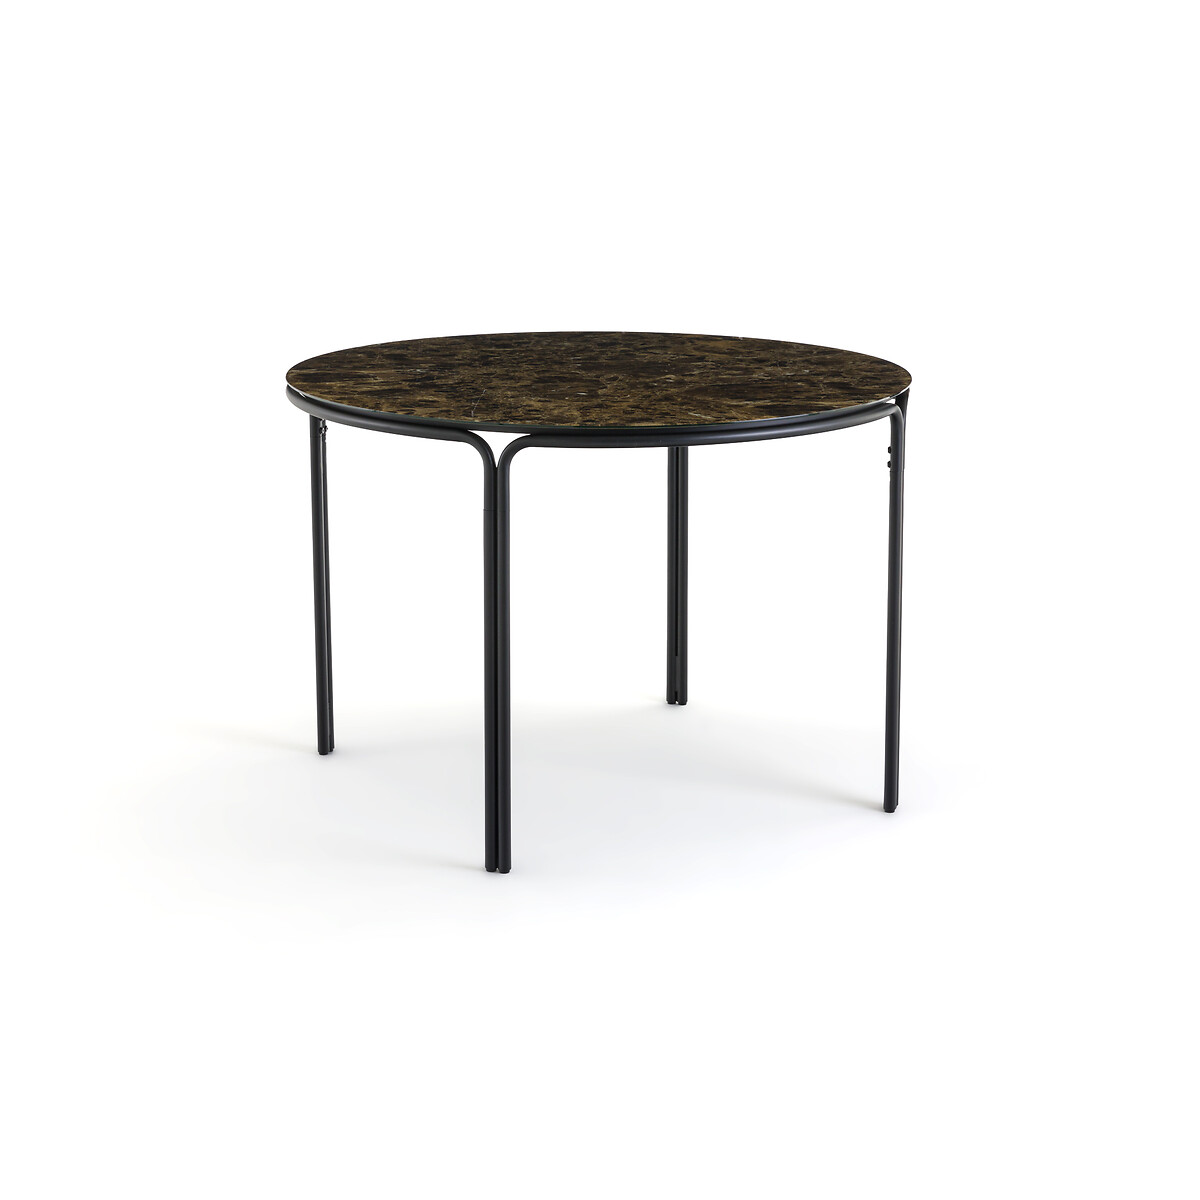 Chici Marble Effect Dining Table